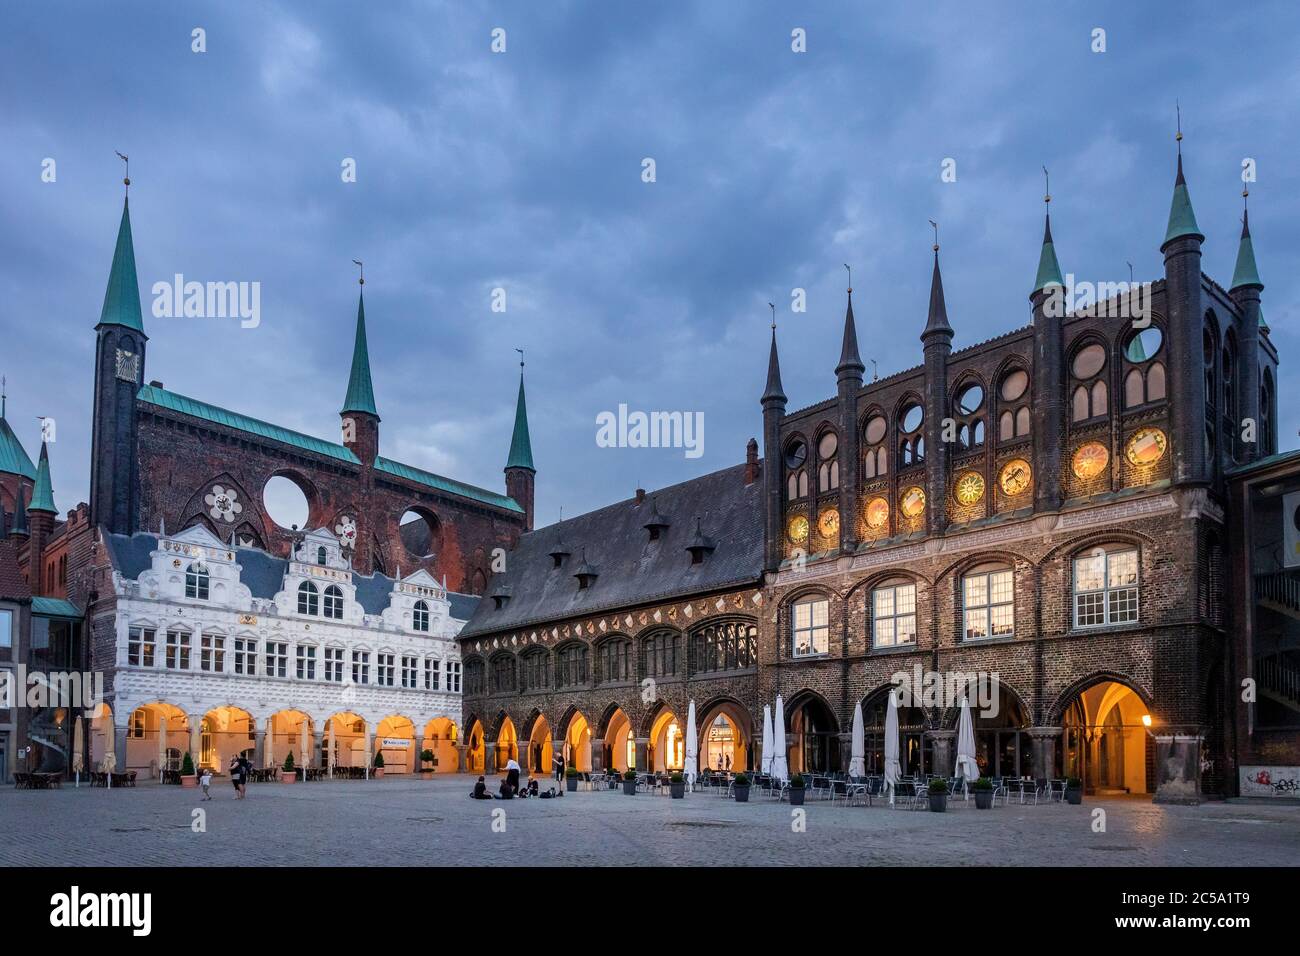 The town hall of the Hanseatic city of Luebeck is one of the most famous buildings of the brick Gothic style. Stock Photo